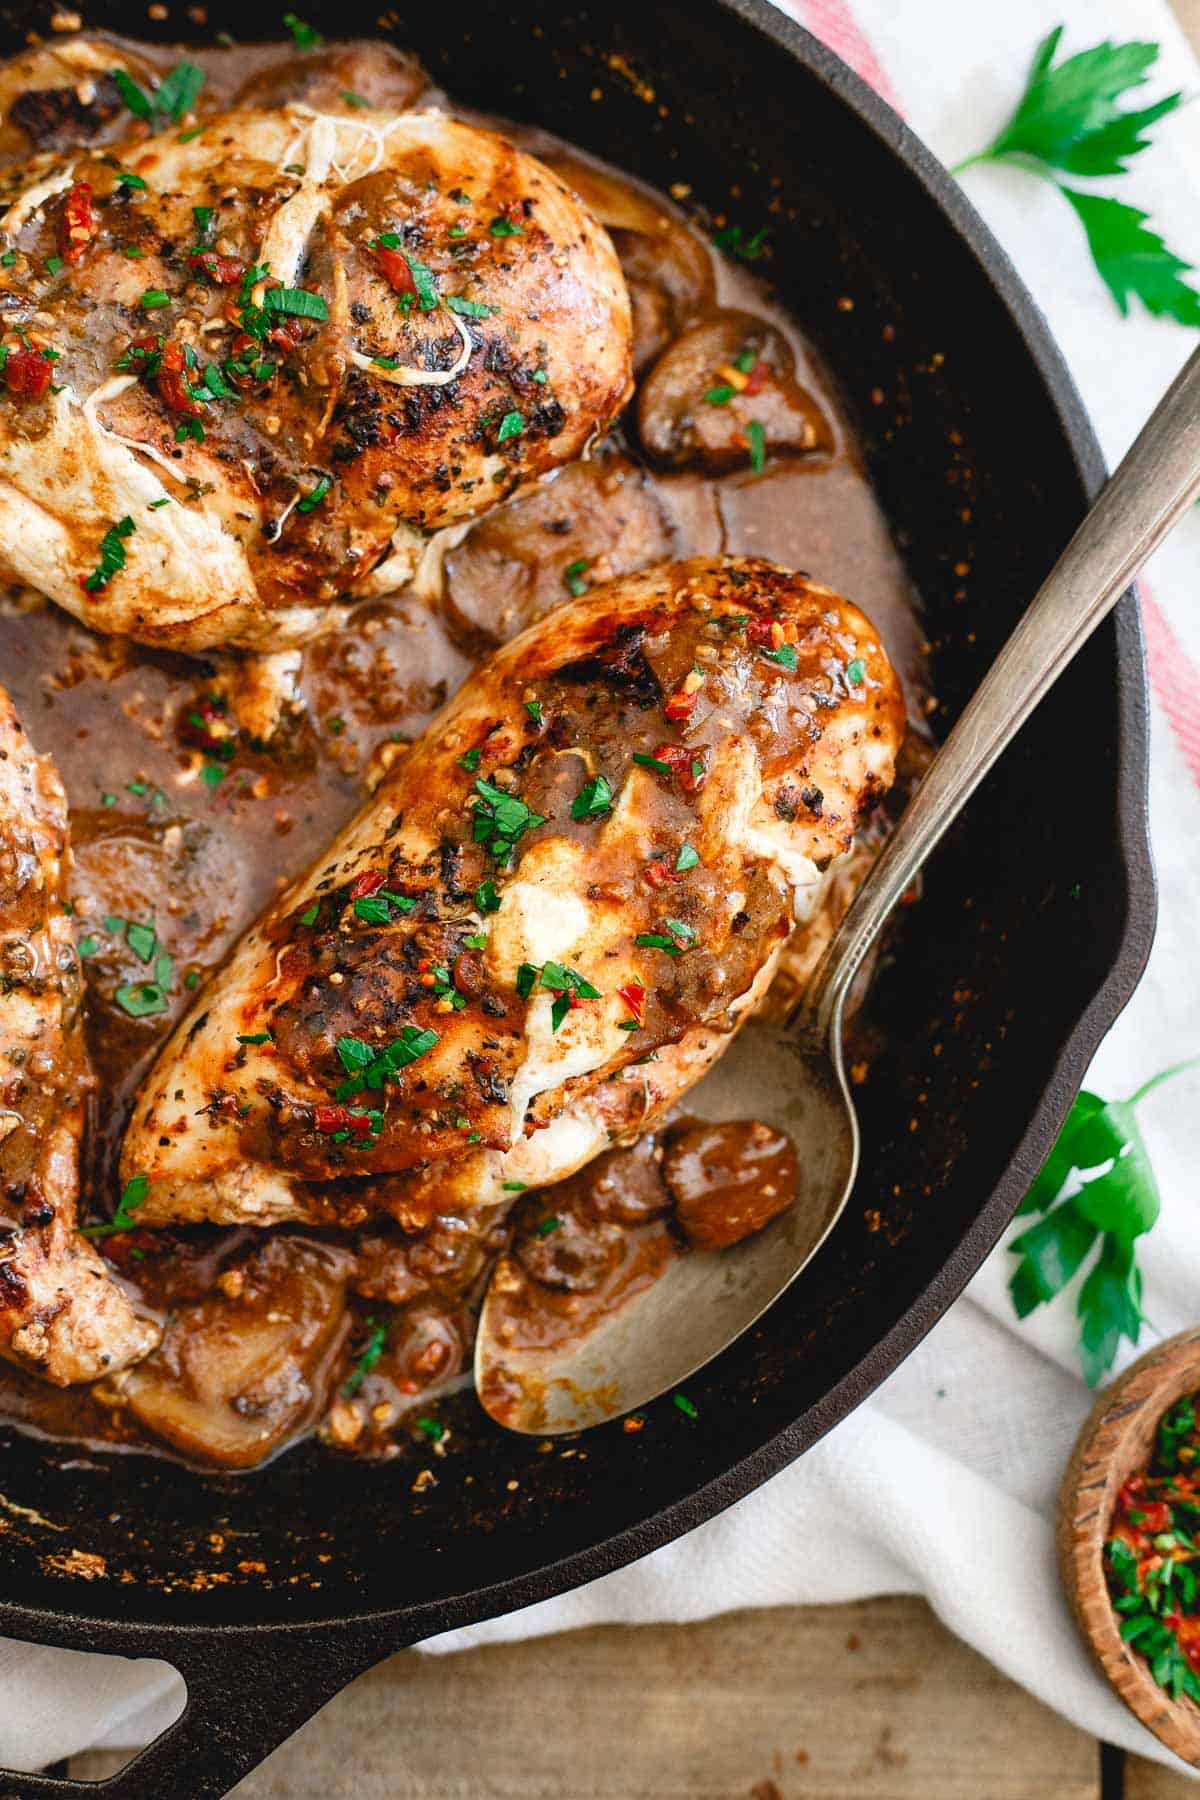 Melted mozzarella, tomato butter and fresh basil are stuffed into chicken cooked in a marsala mushroom sauce.